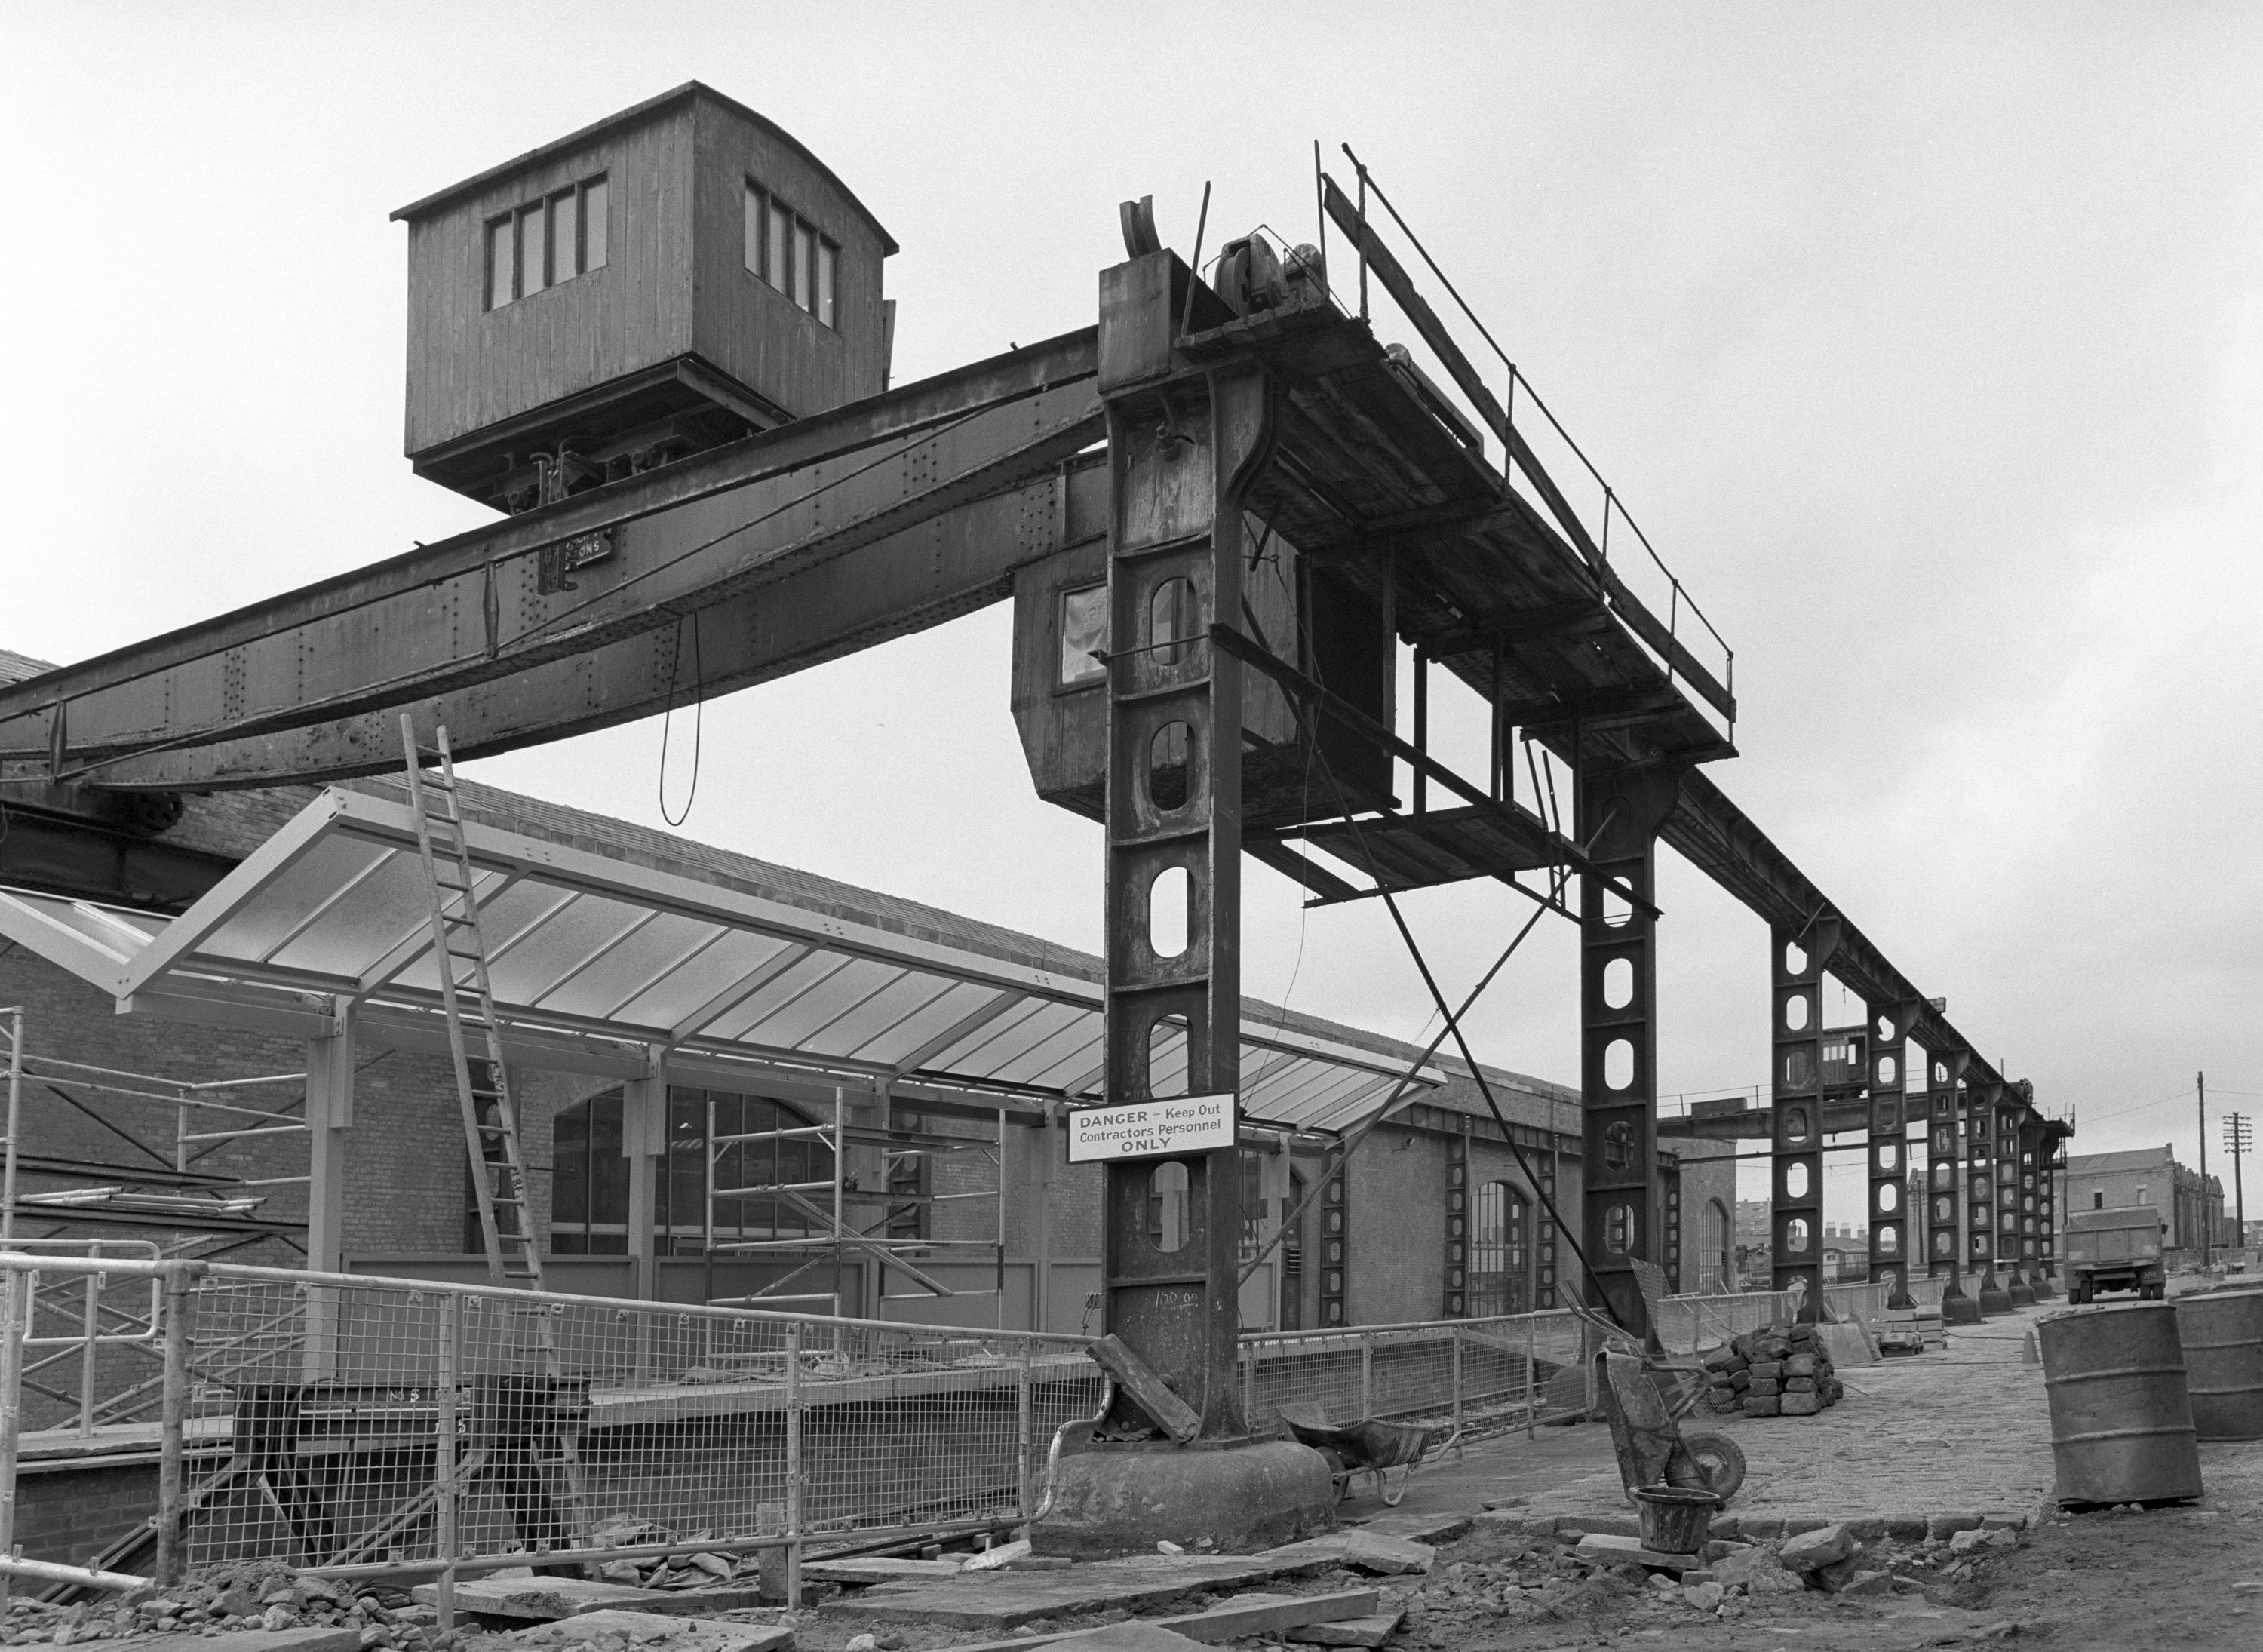 The crane gantry, 1982. Science Museum Group.